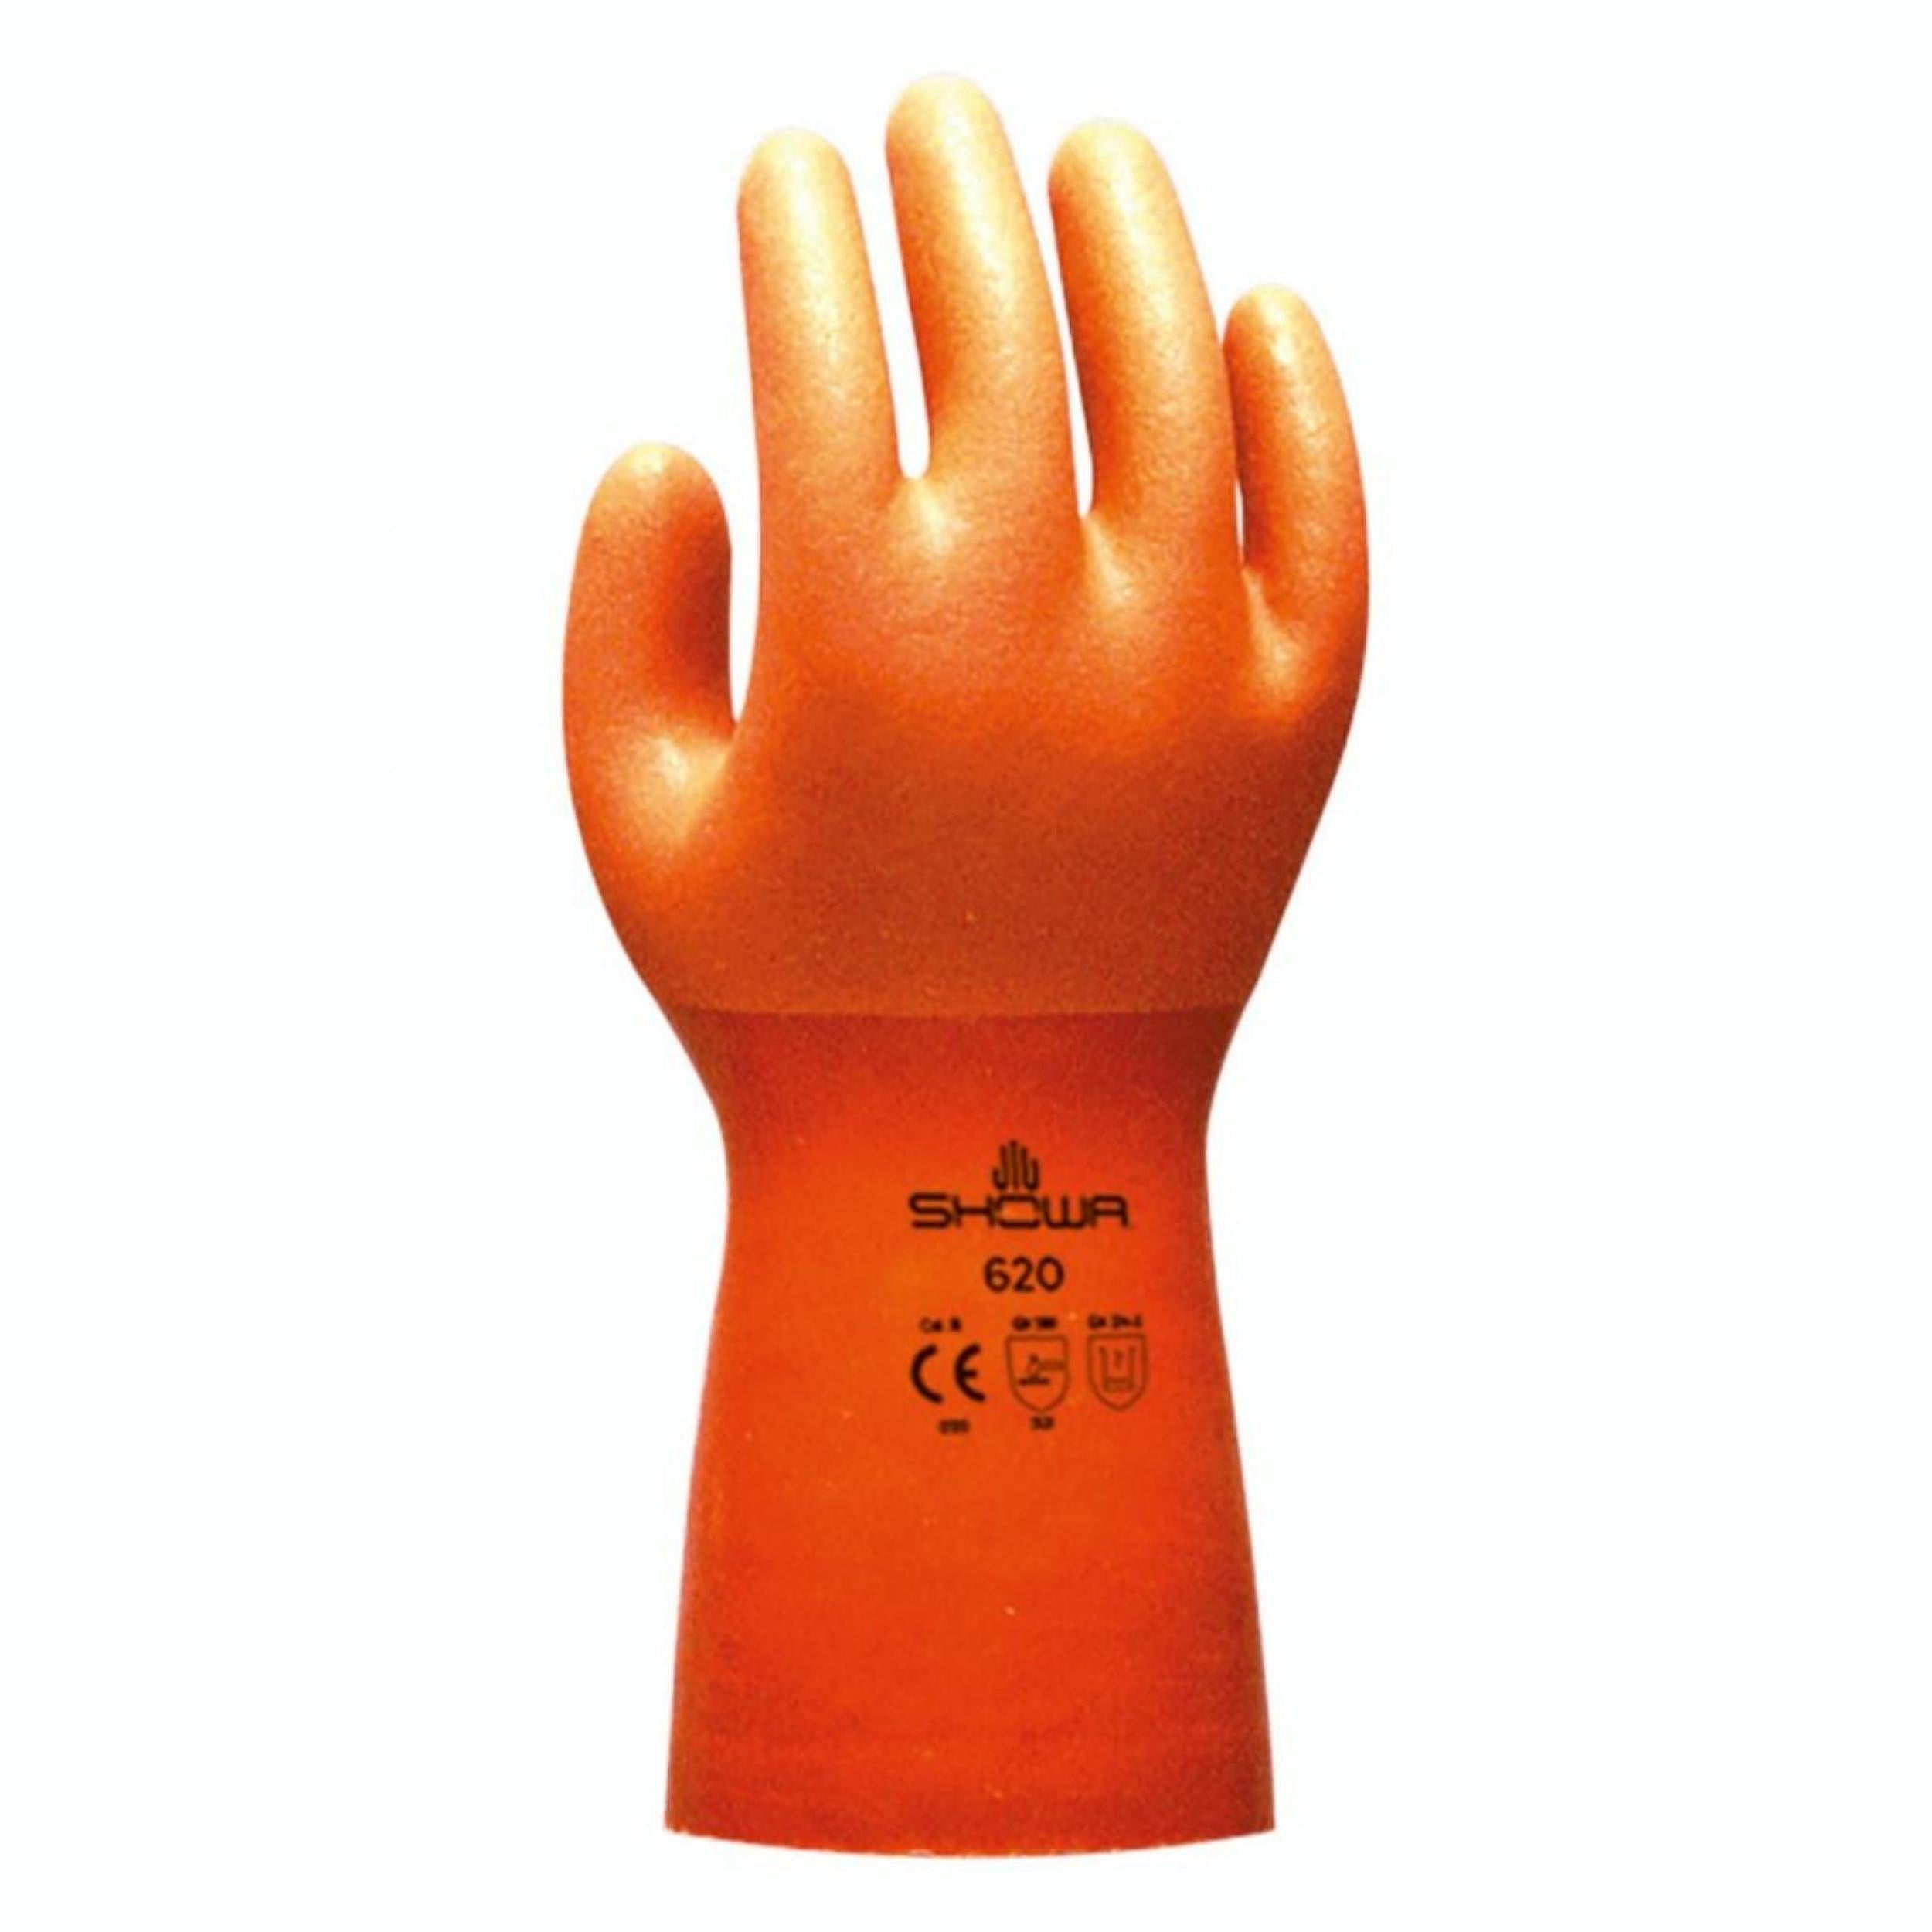 SHOWA 620: Chemical protection gloves